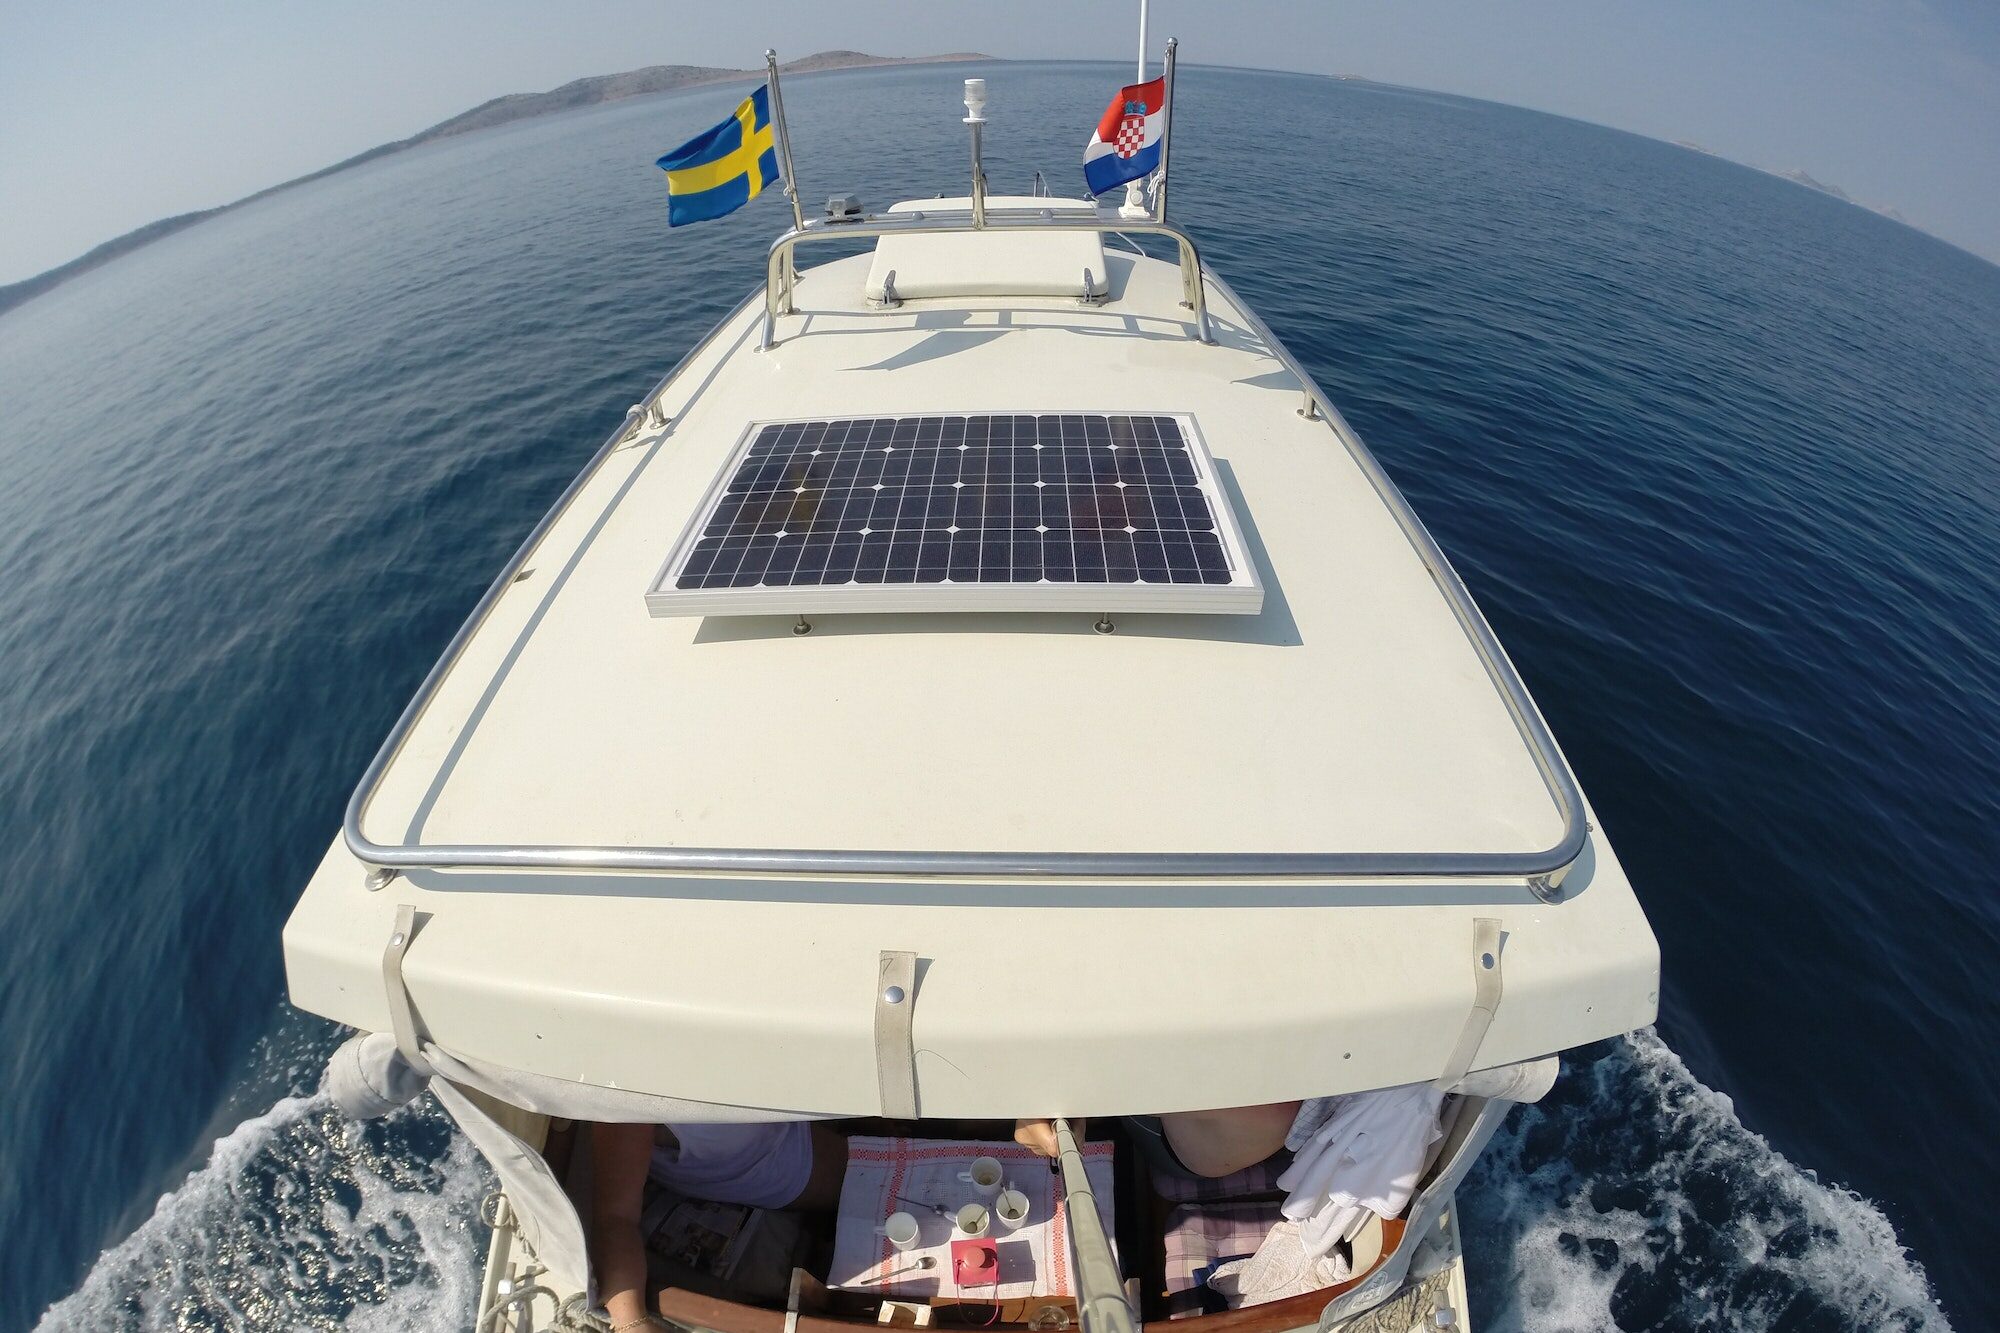 Boat with solar panels on top